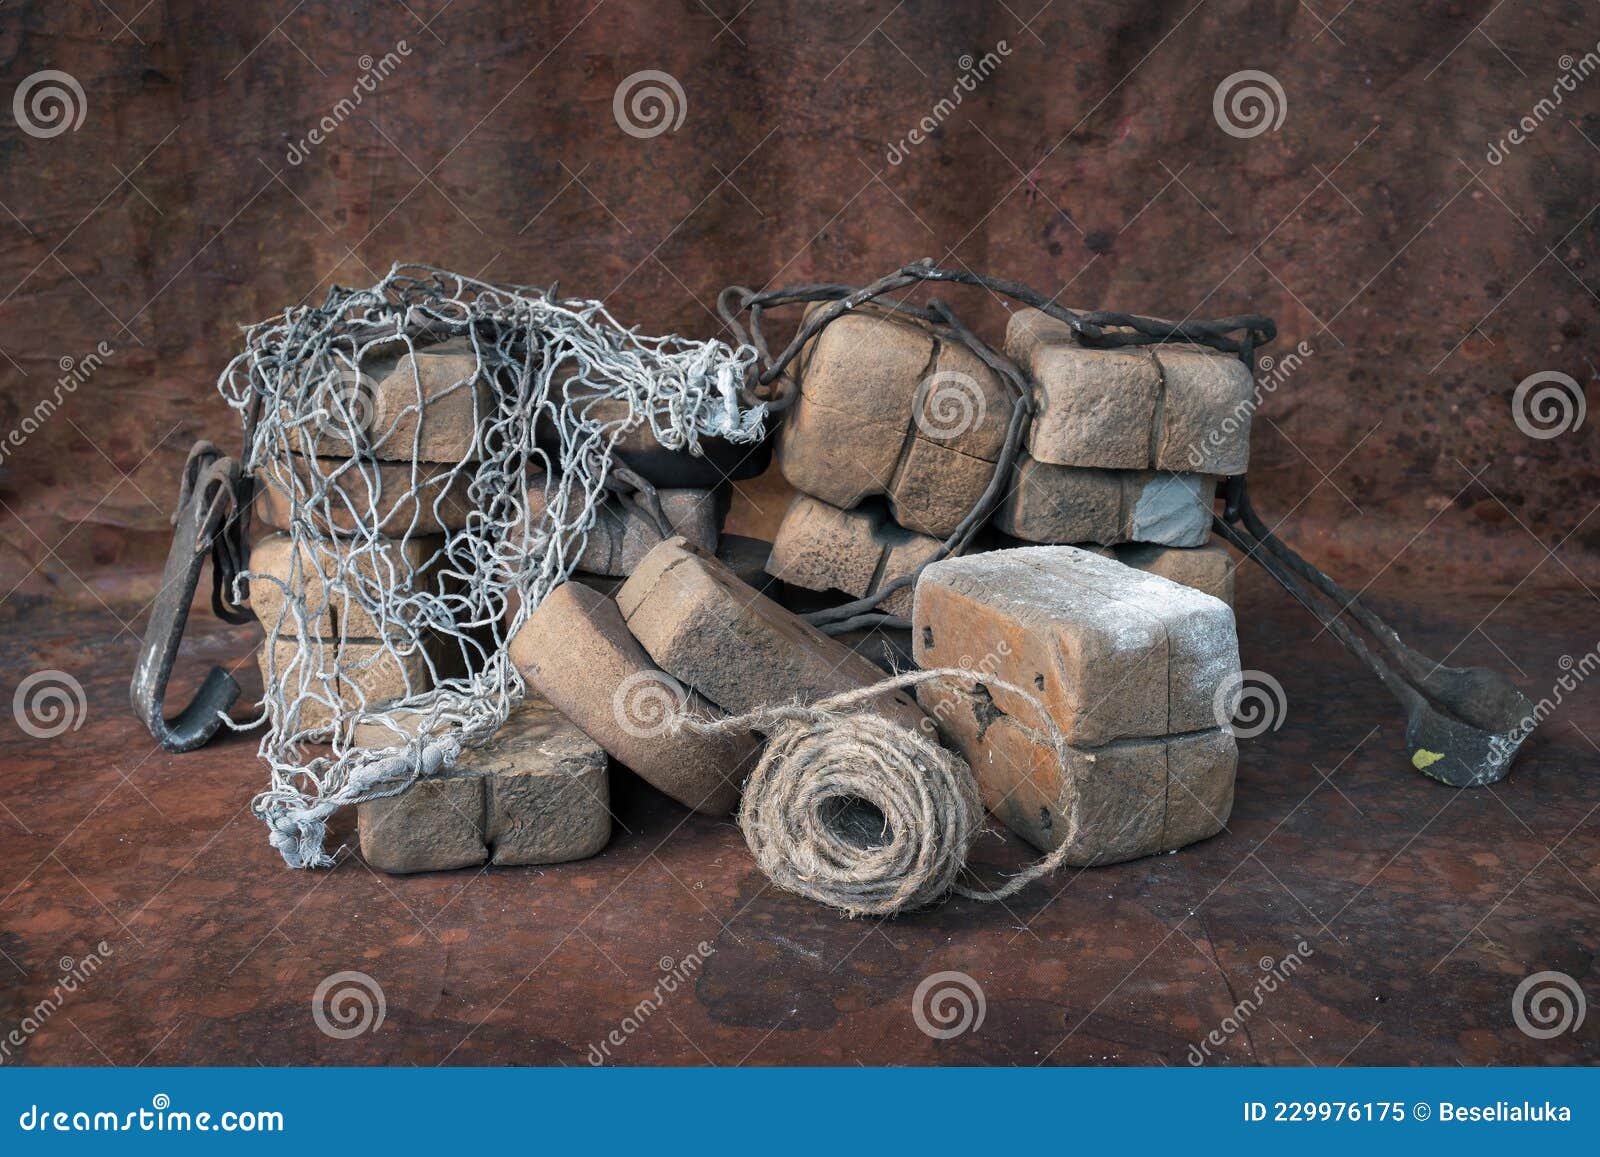 A pile of cork floats stock image. Image of material - 229976175